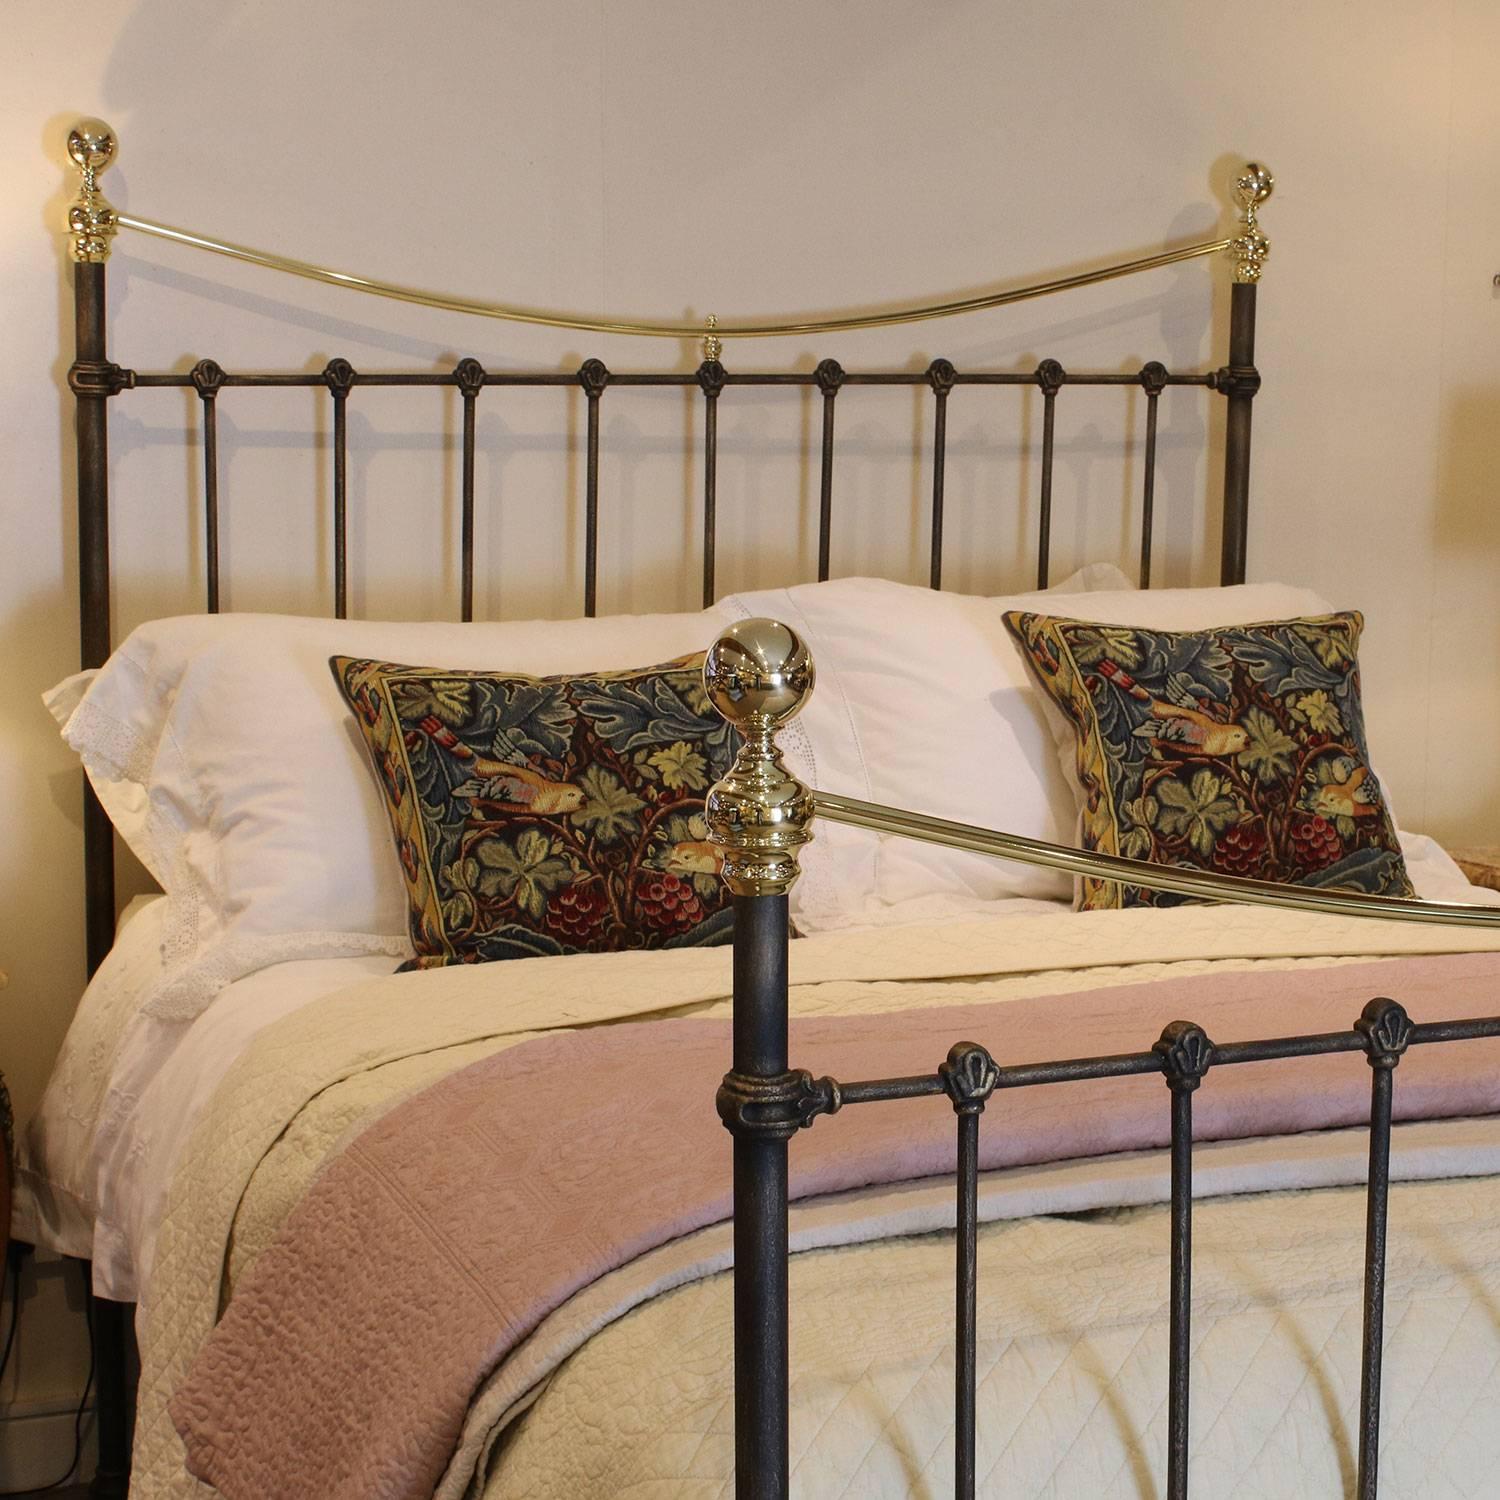 A brass and iron bedstead adapted from an original Victorian frame and finished in brushed gold with curved straight top rails and decorative castings.

This bed accepts a British king-size or US queen-size (measure: 5ft, 60 in or 150cm wide) base